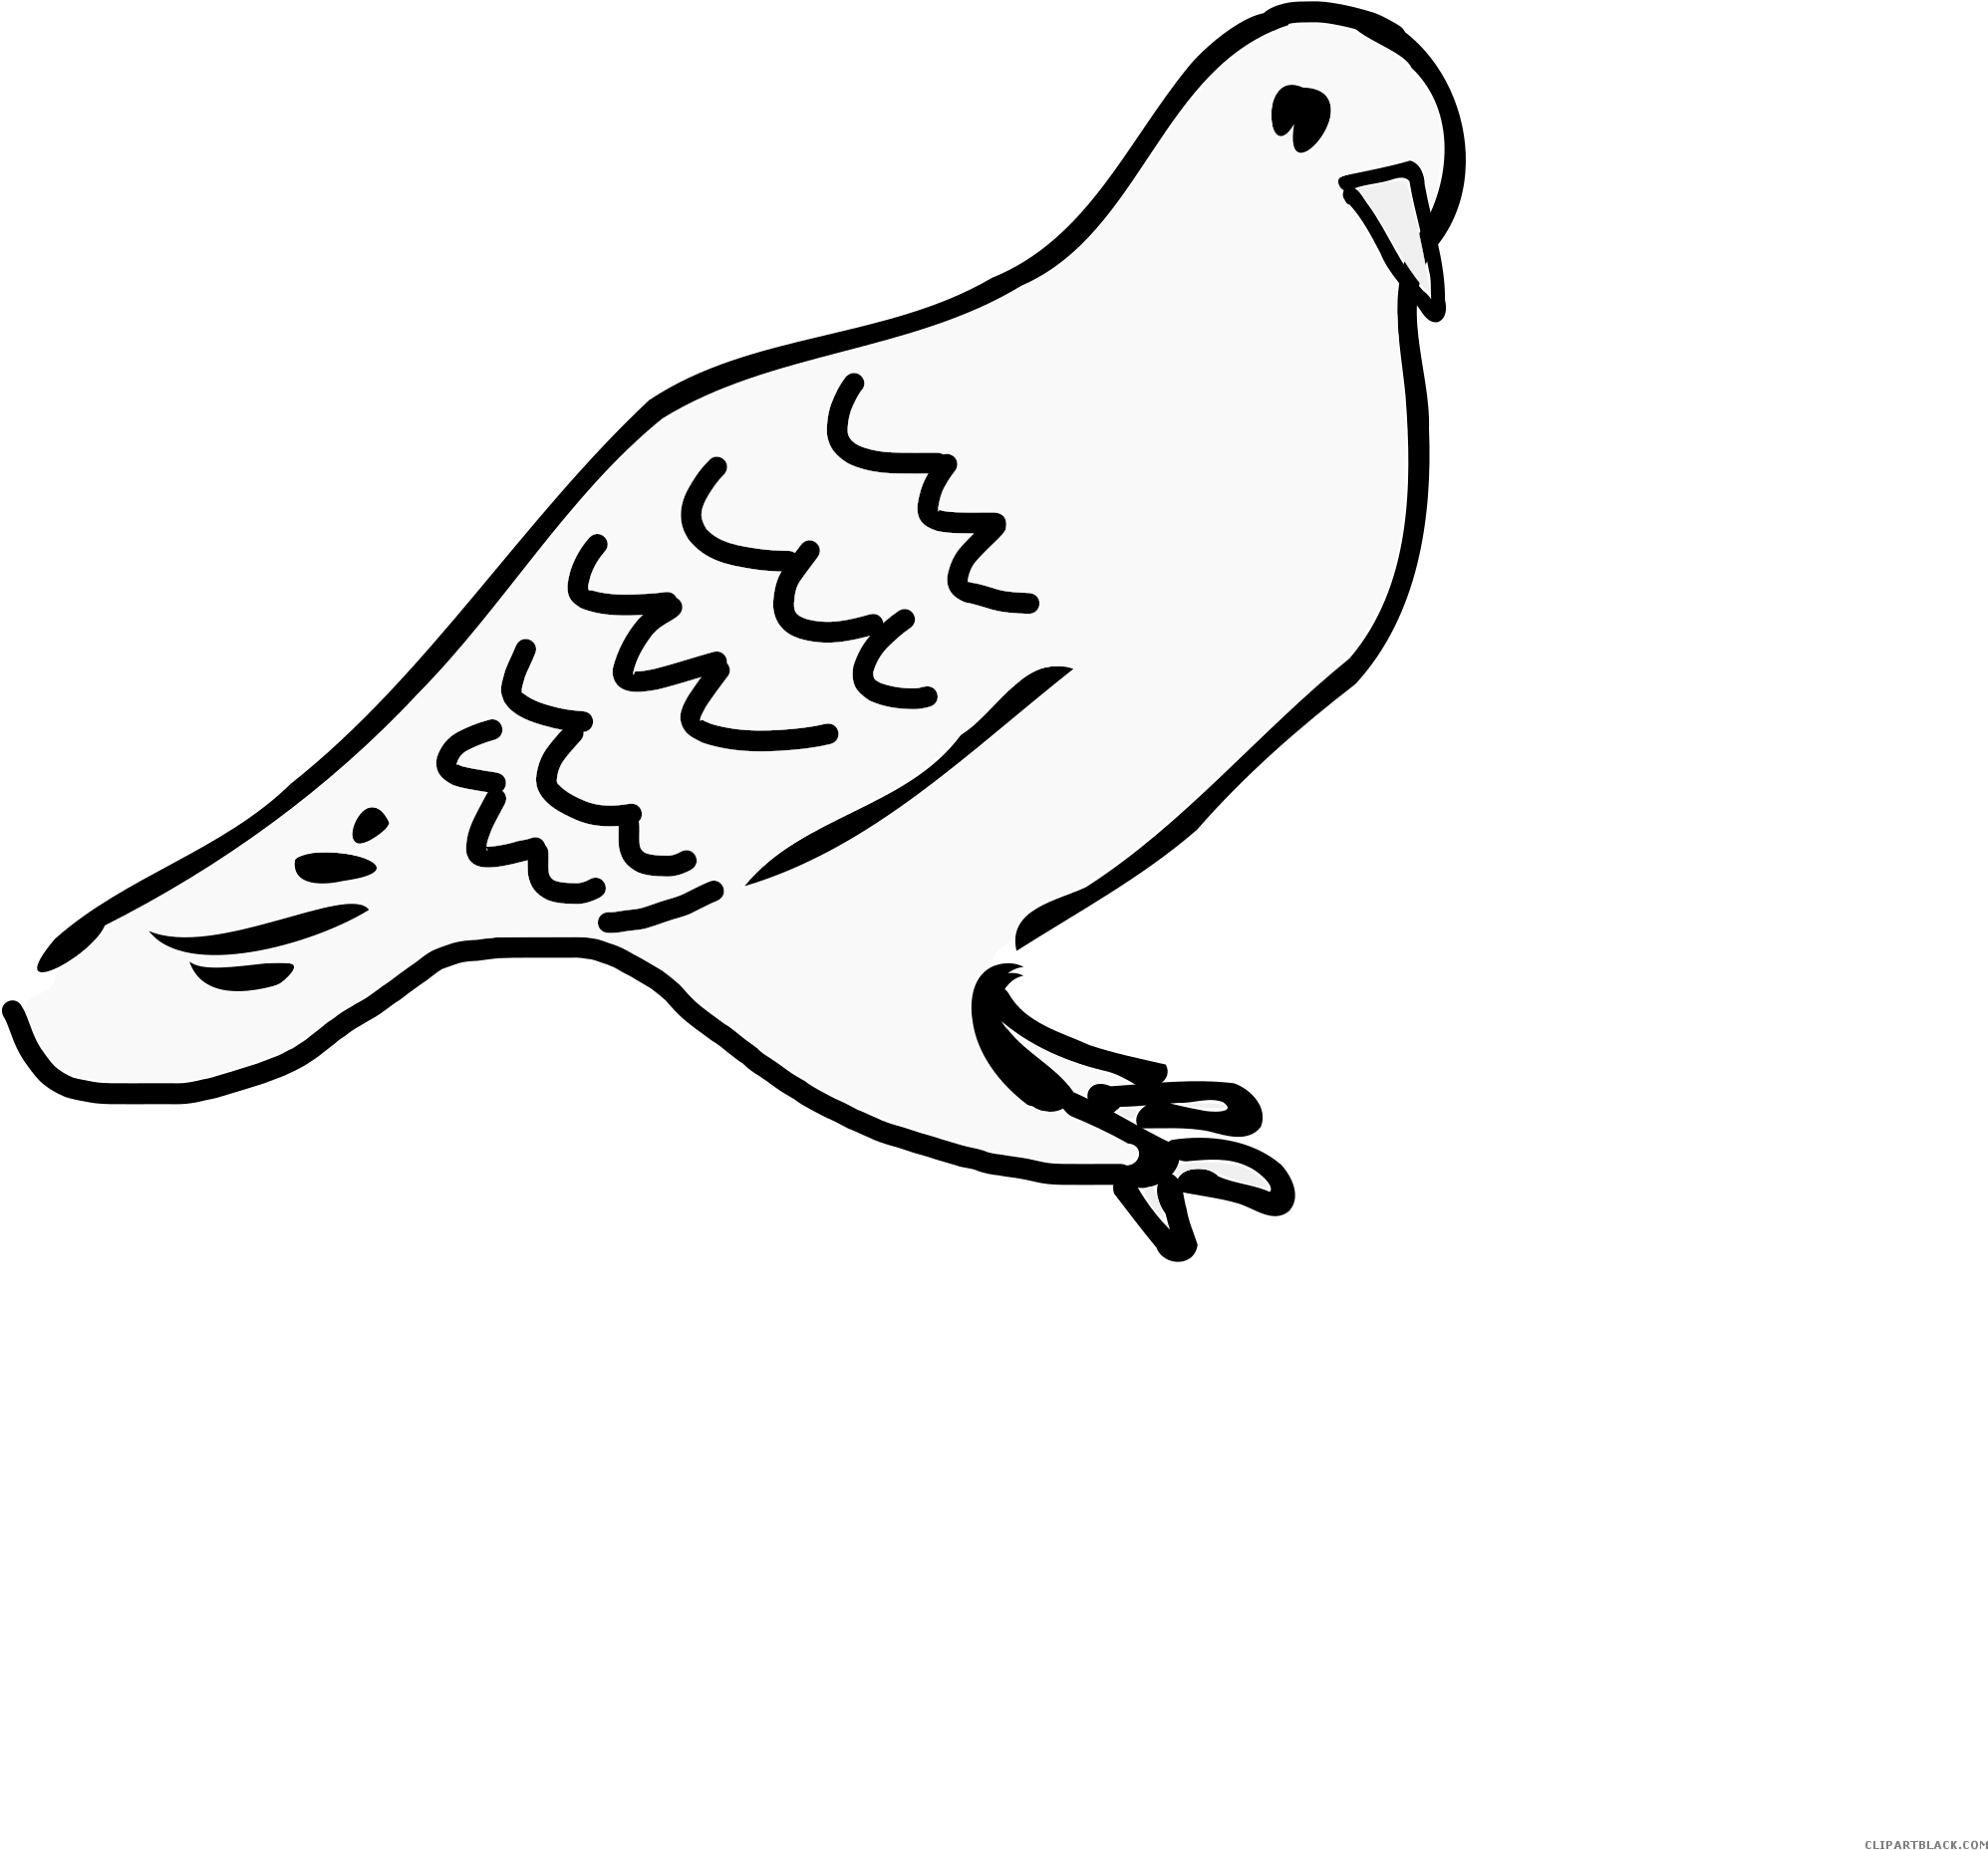 Love Doves Animal Free Black White Clipart Images Clipartblack - Draw A Dove Sitting (2400x2400)